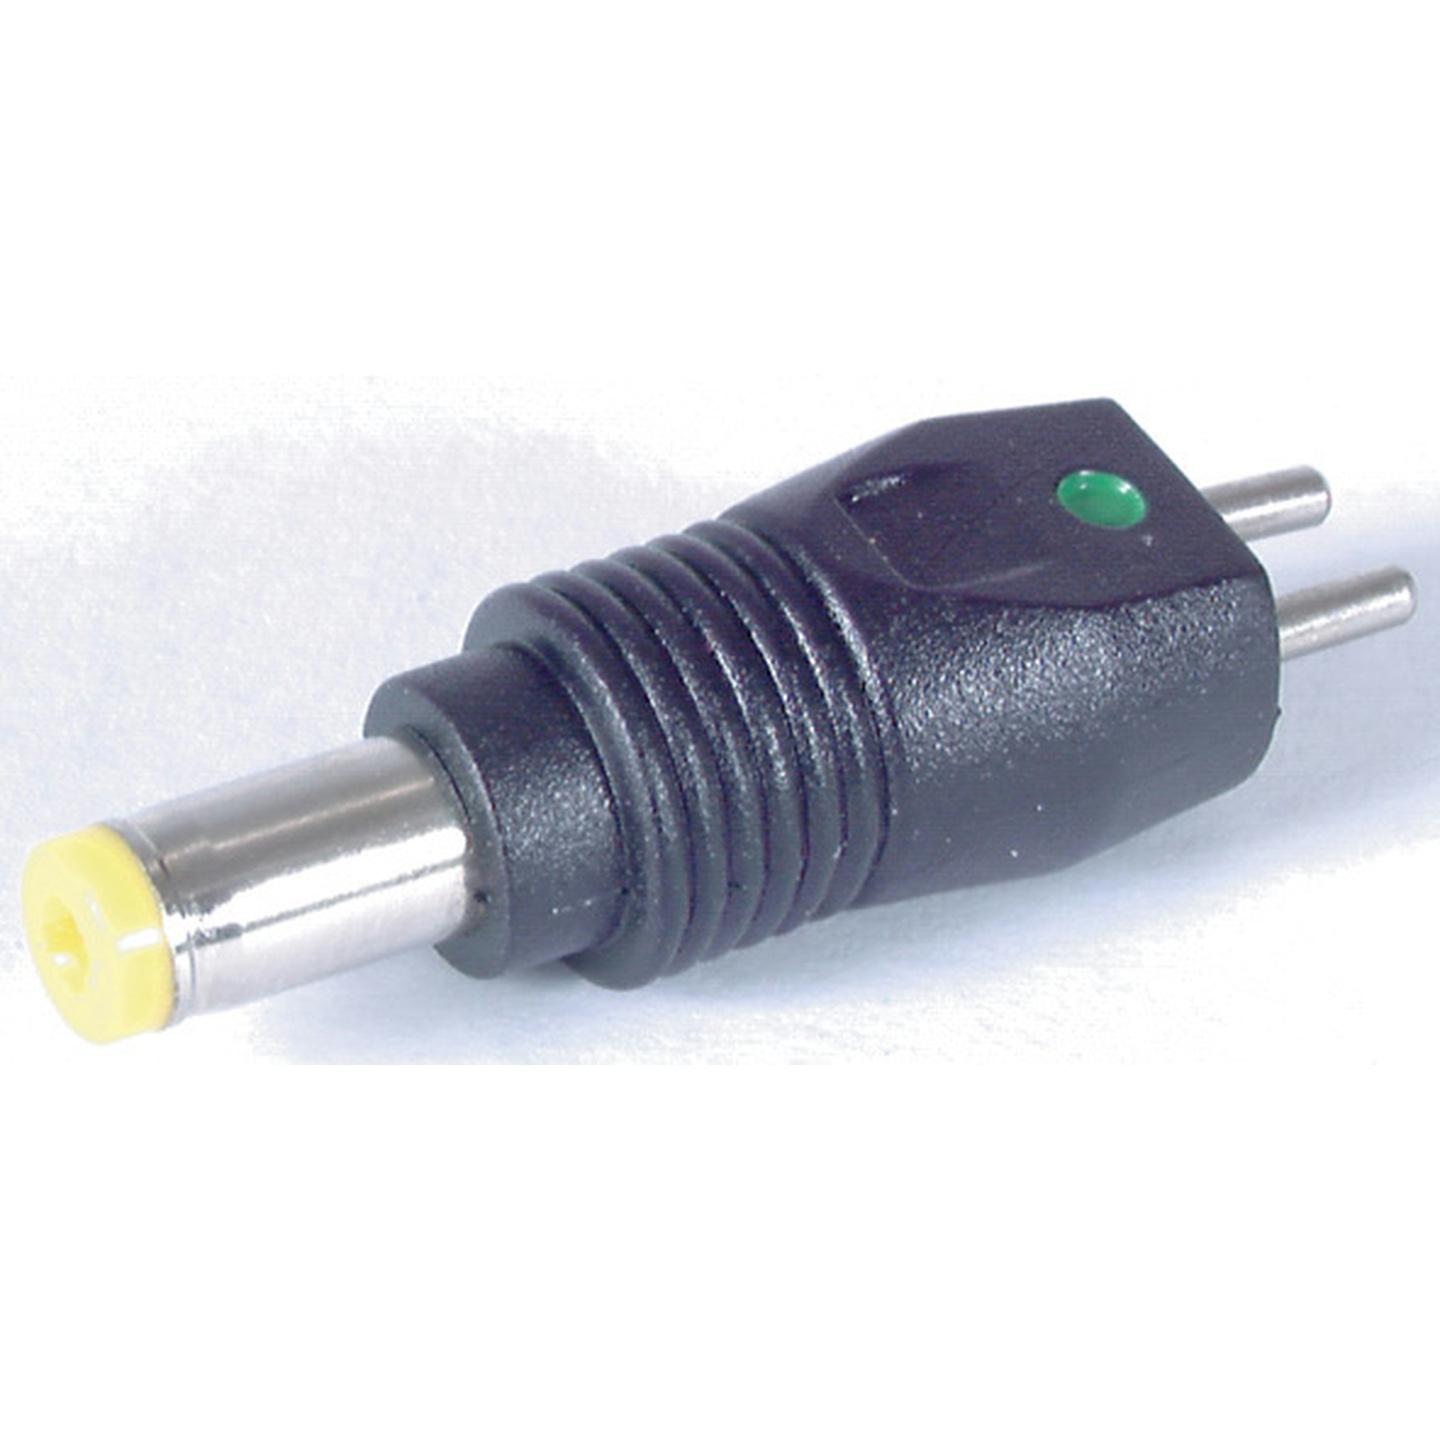 1.75mm Plug to Suit Plugpack - Green Dot